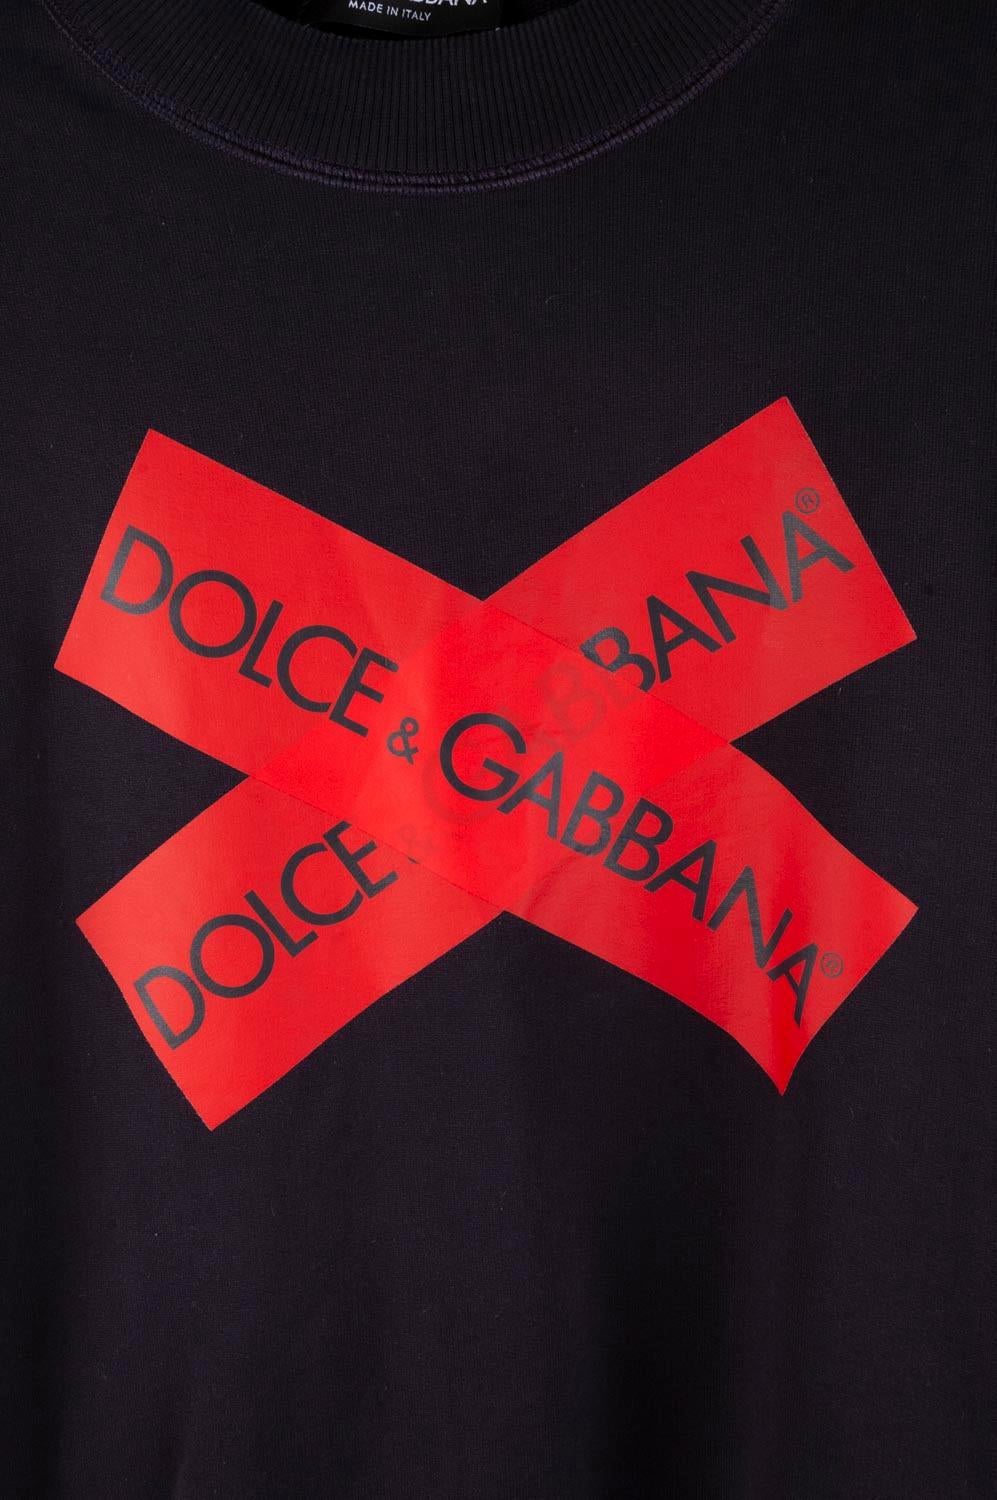 New Dolce&Gabbana Men Sweatshirt Jumper Pullover Red Cross, Size 46IT (S/M) S444 In New Condition For Sale In Kaunas, LT